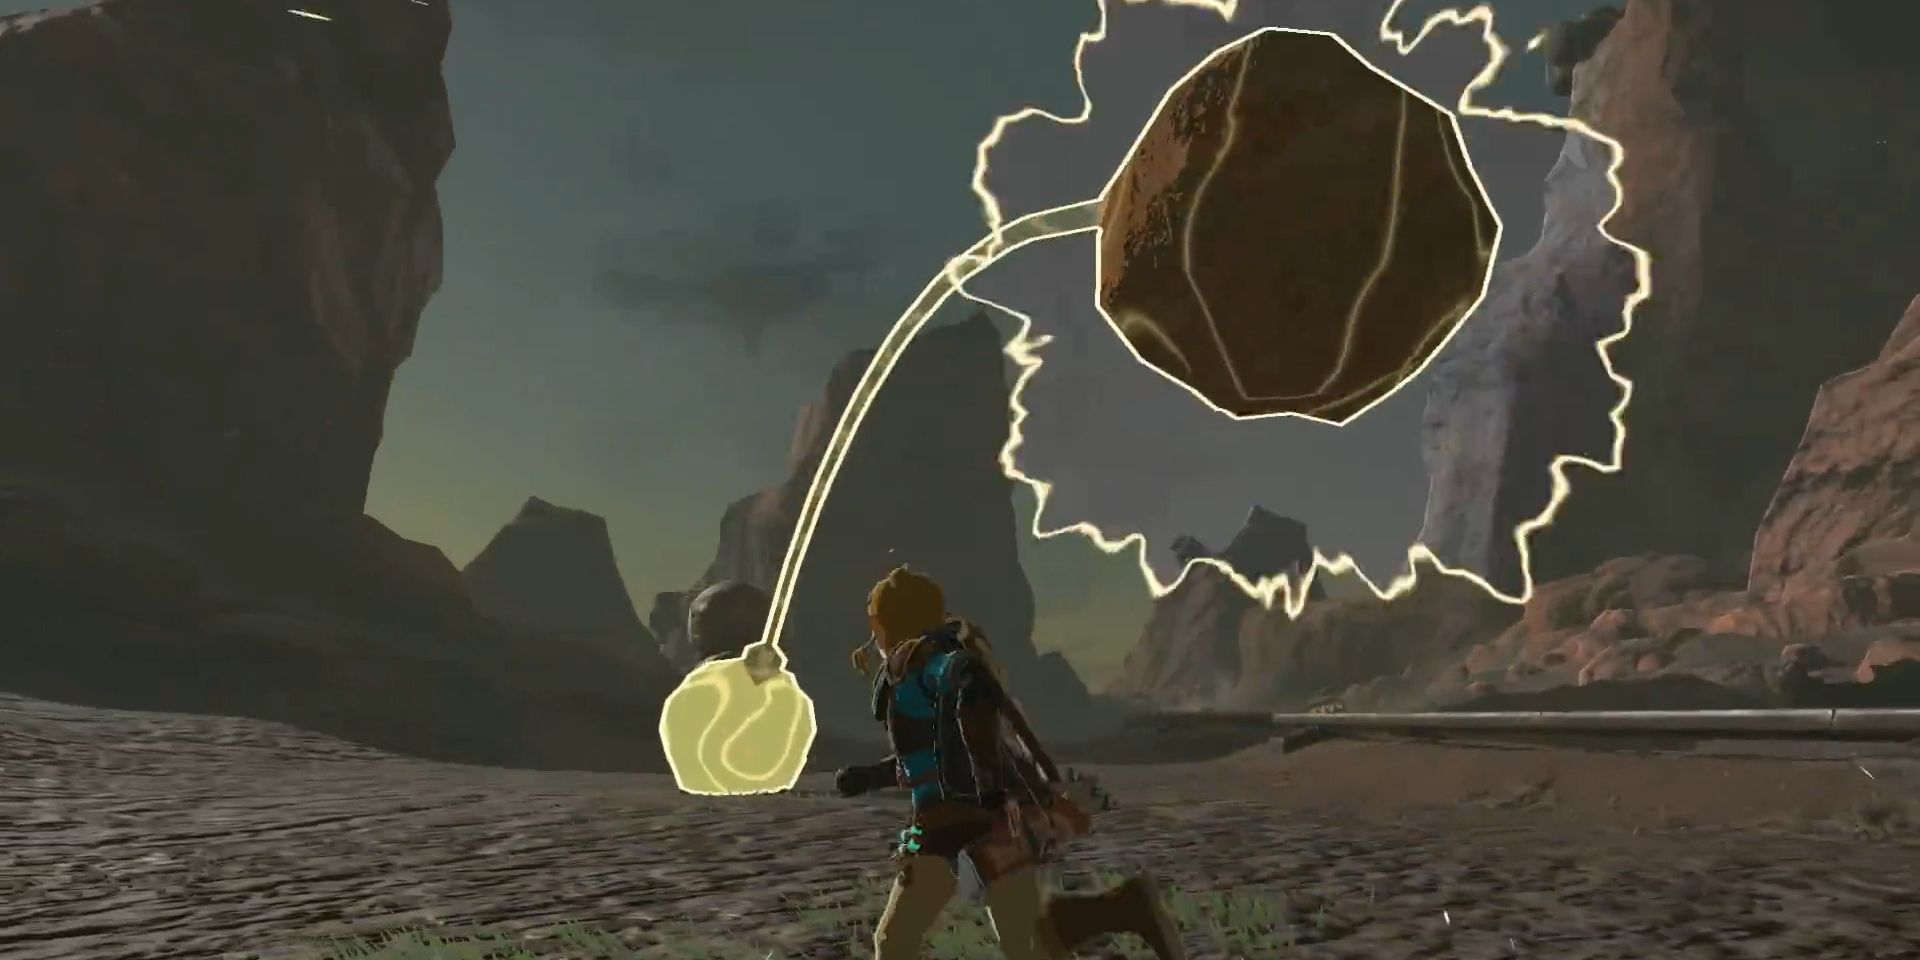 Using the Recall ability, Link directs a flying boulder back at an Octorok in Tears of the Kingdom